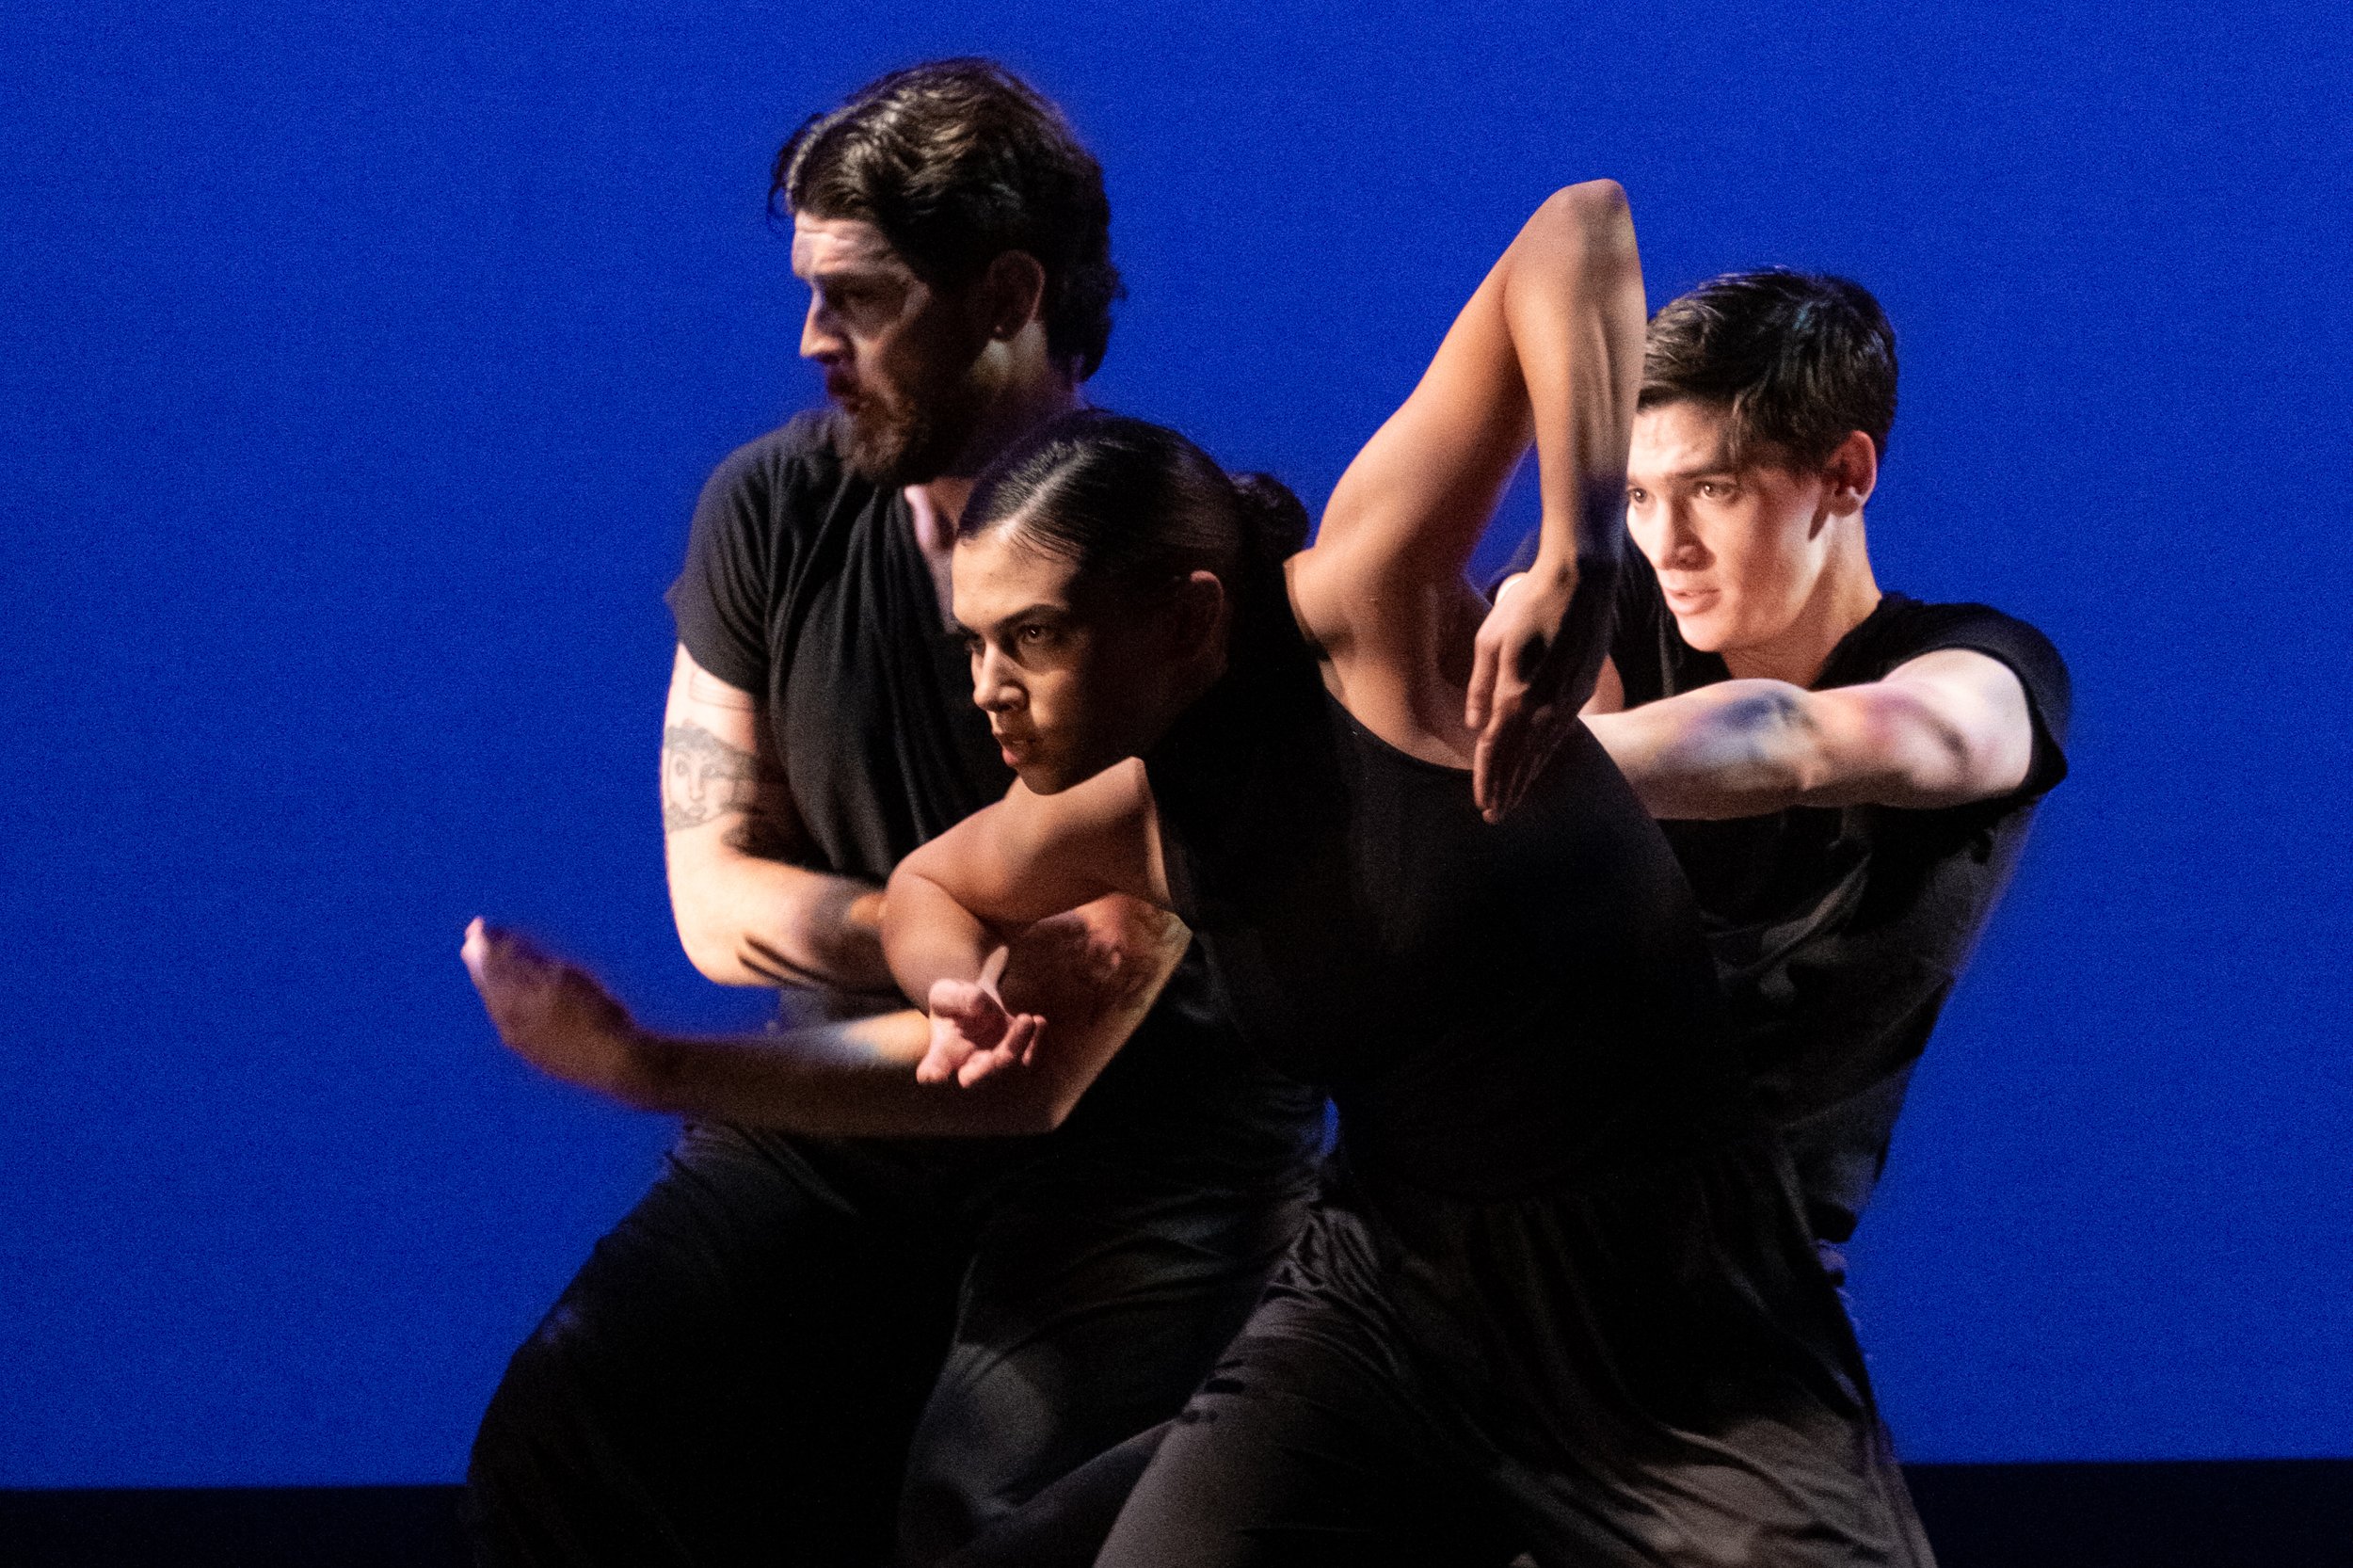  From L to R, dancers Michael Hamilton, Erille Weiss and Simon Lathrop rehearse a piece choreographed by student choreophraher Simon Lathrop for the Santa Monica College Contemporary Dance Performance Synapse at BroadStage in Santa Monica, Calif. on 